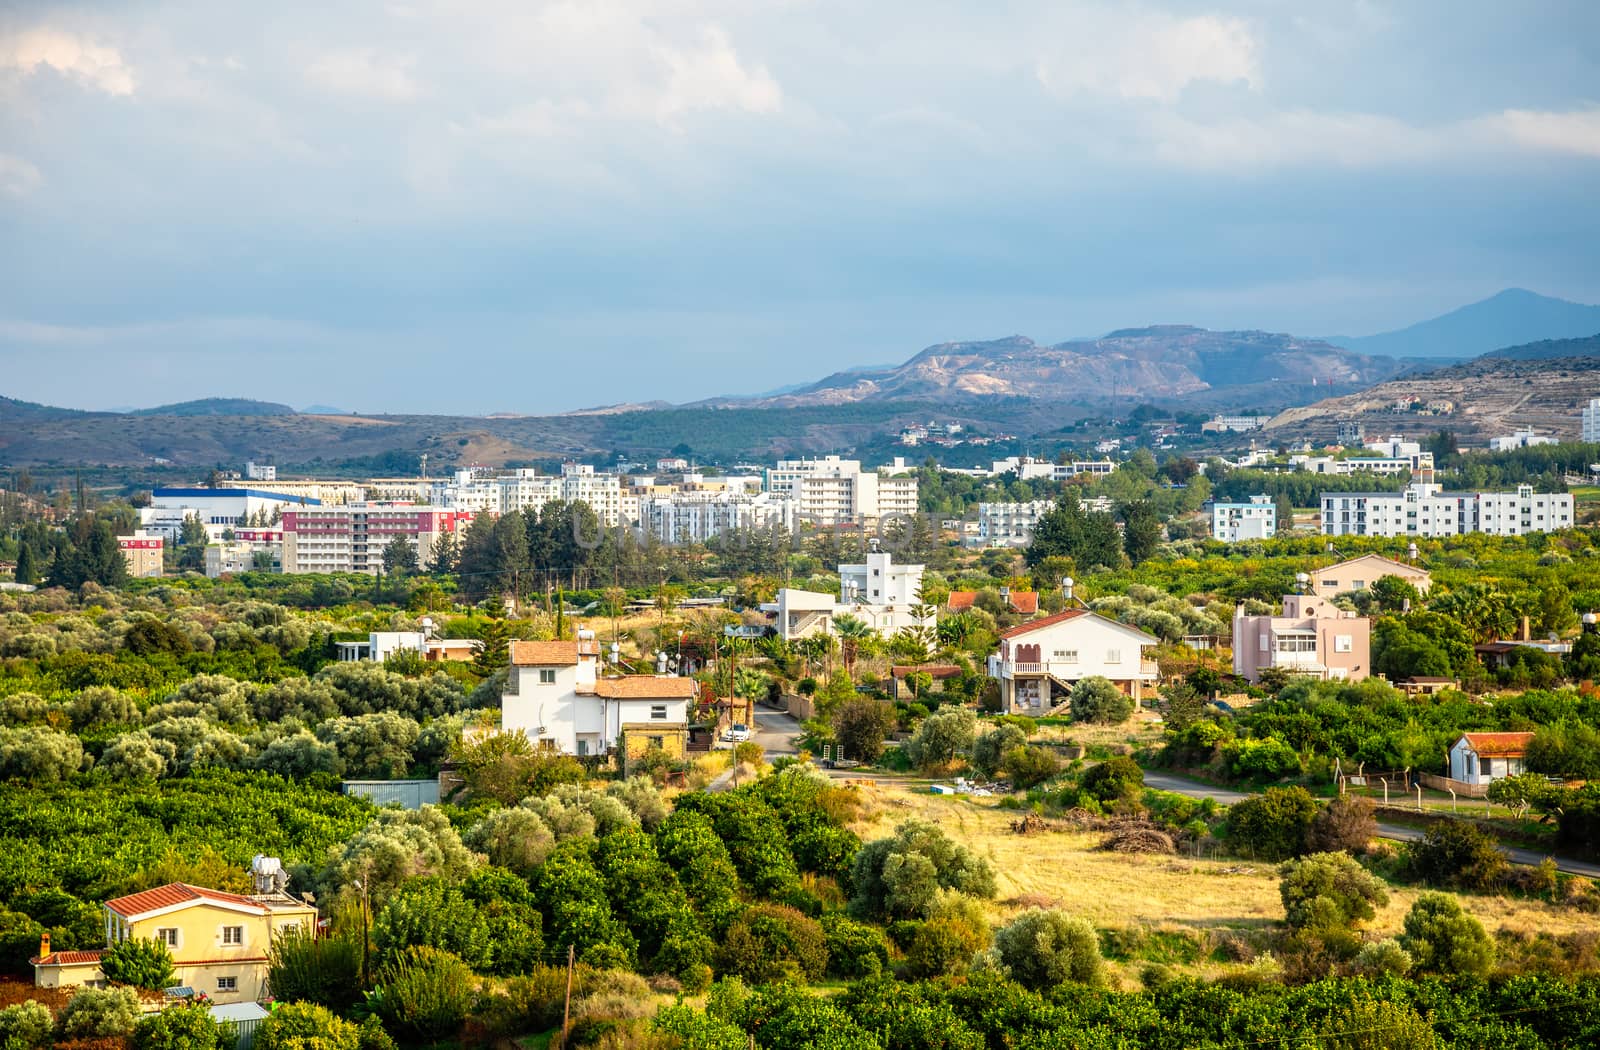 Lefka city center with modern buildings and green residential su by ambeon